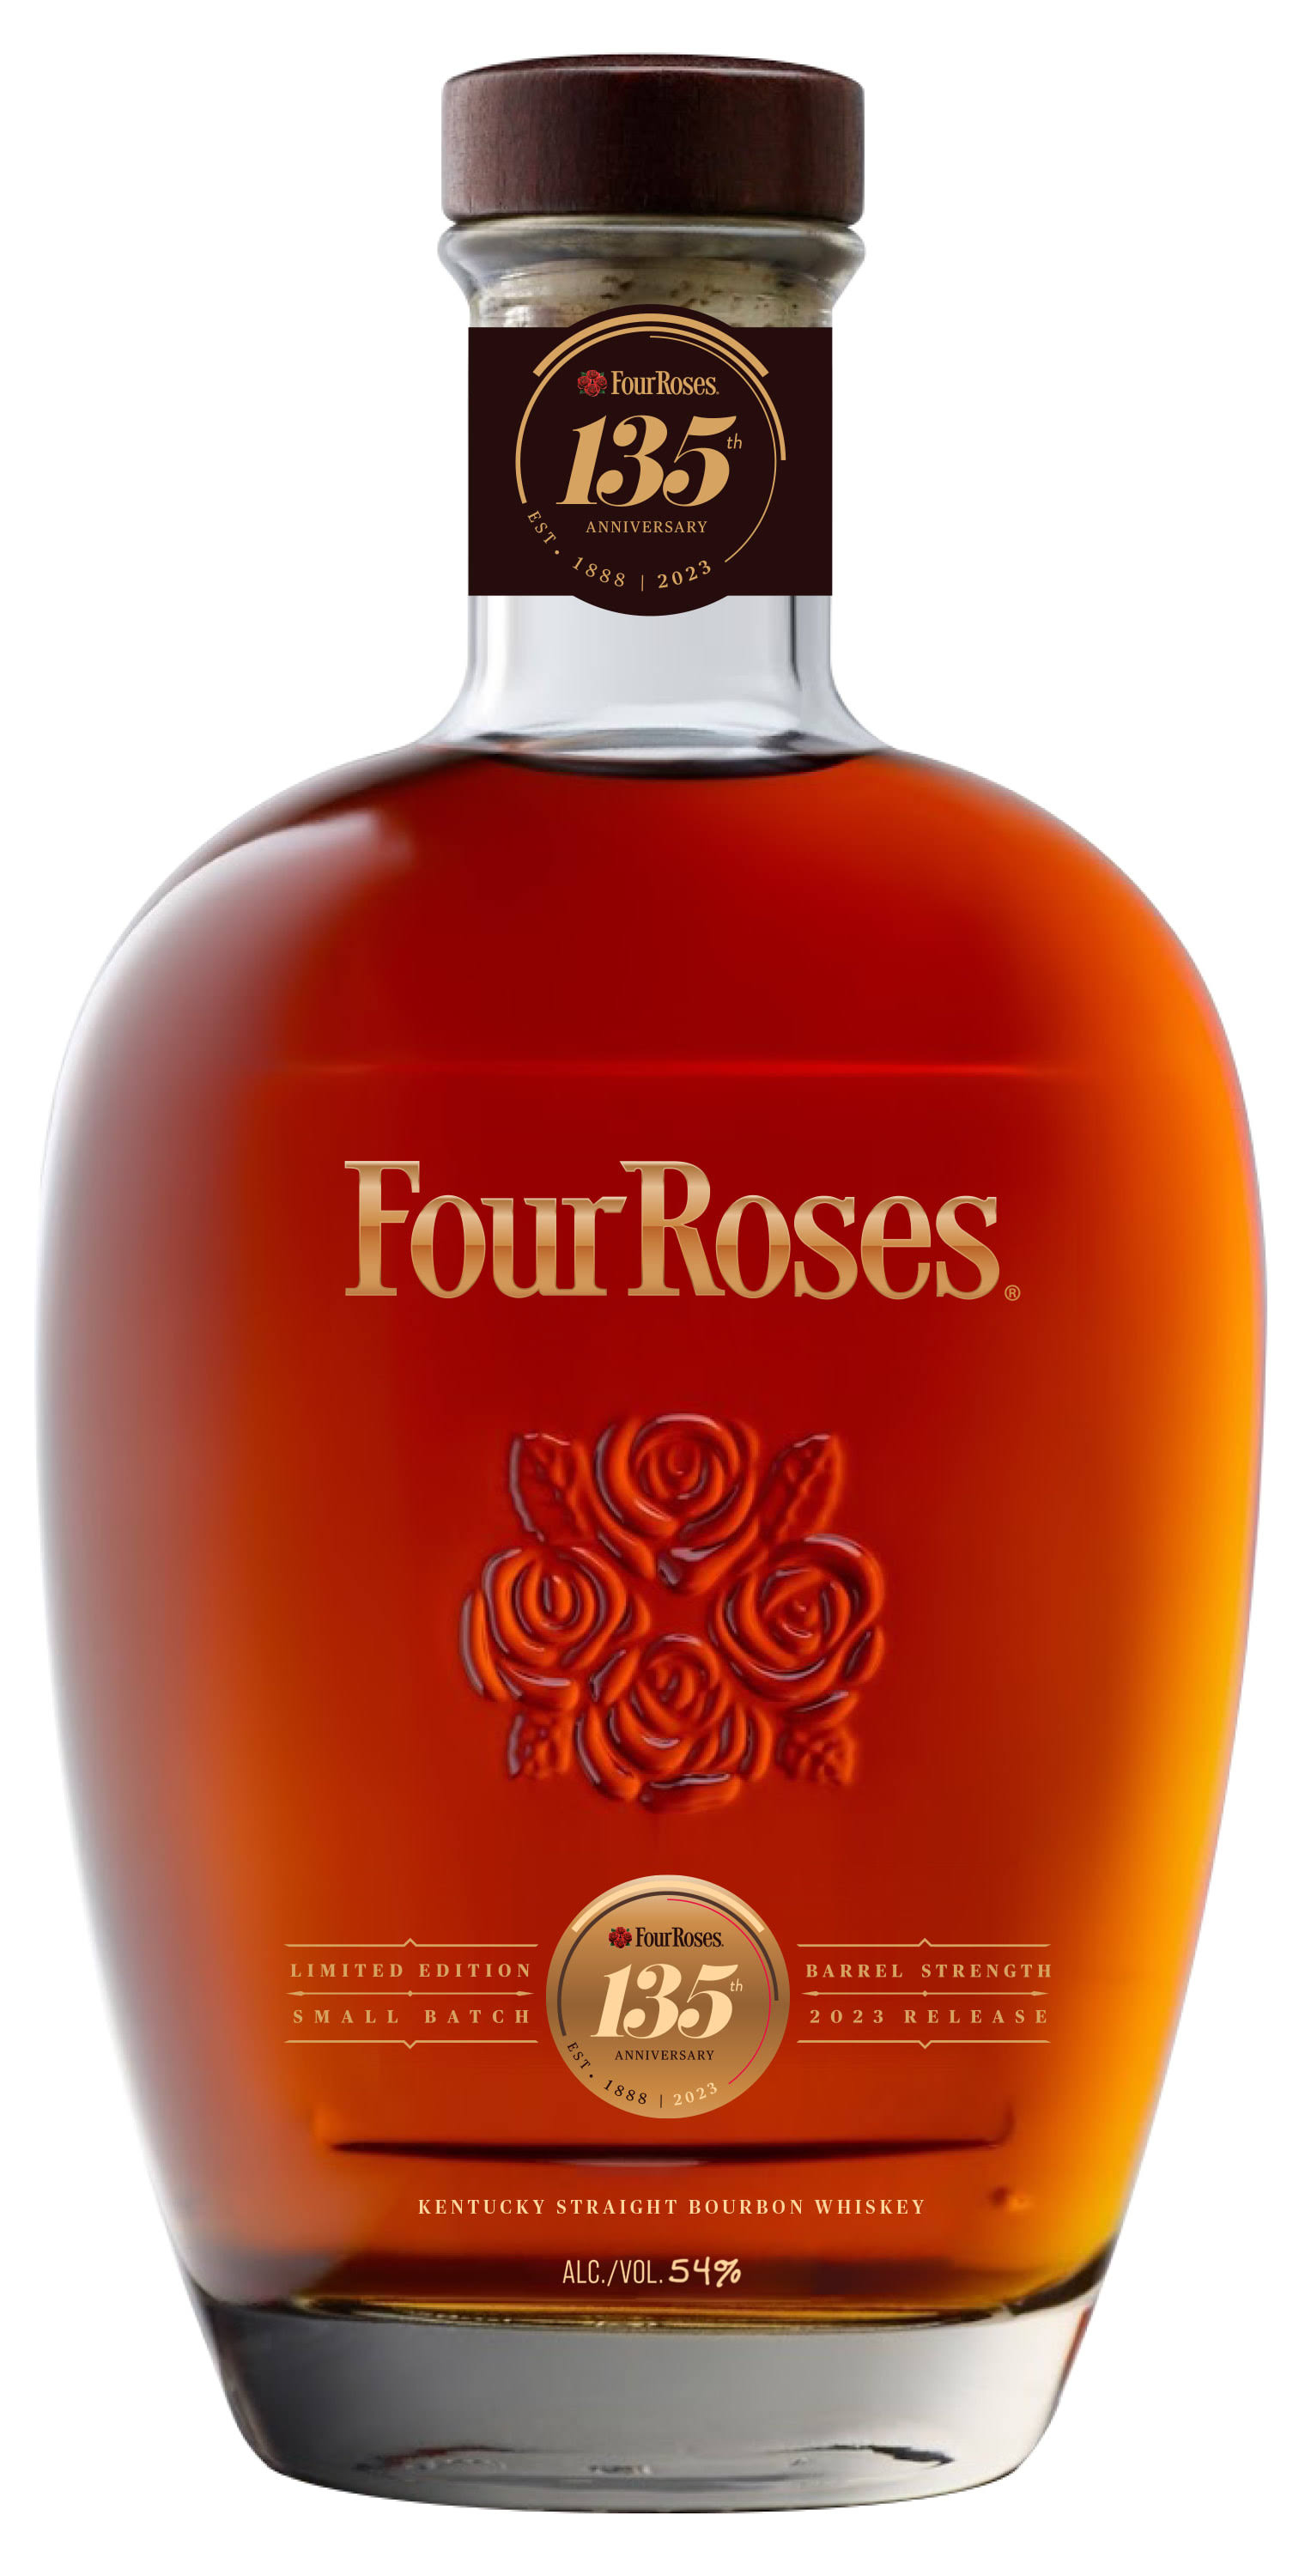 Four Roses 135th Anniversary Limited Edition 2023 Small Batch Bourbon